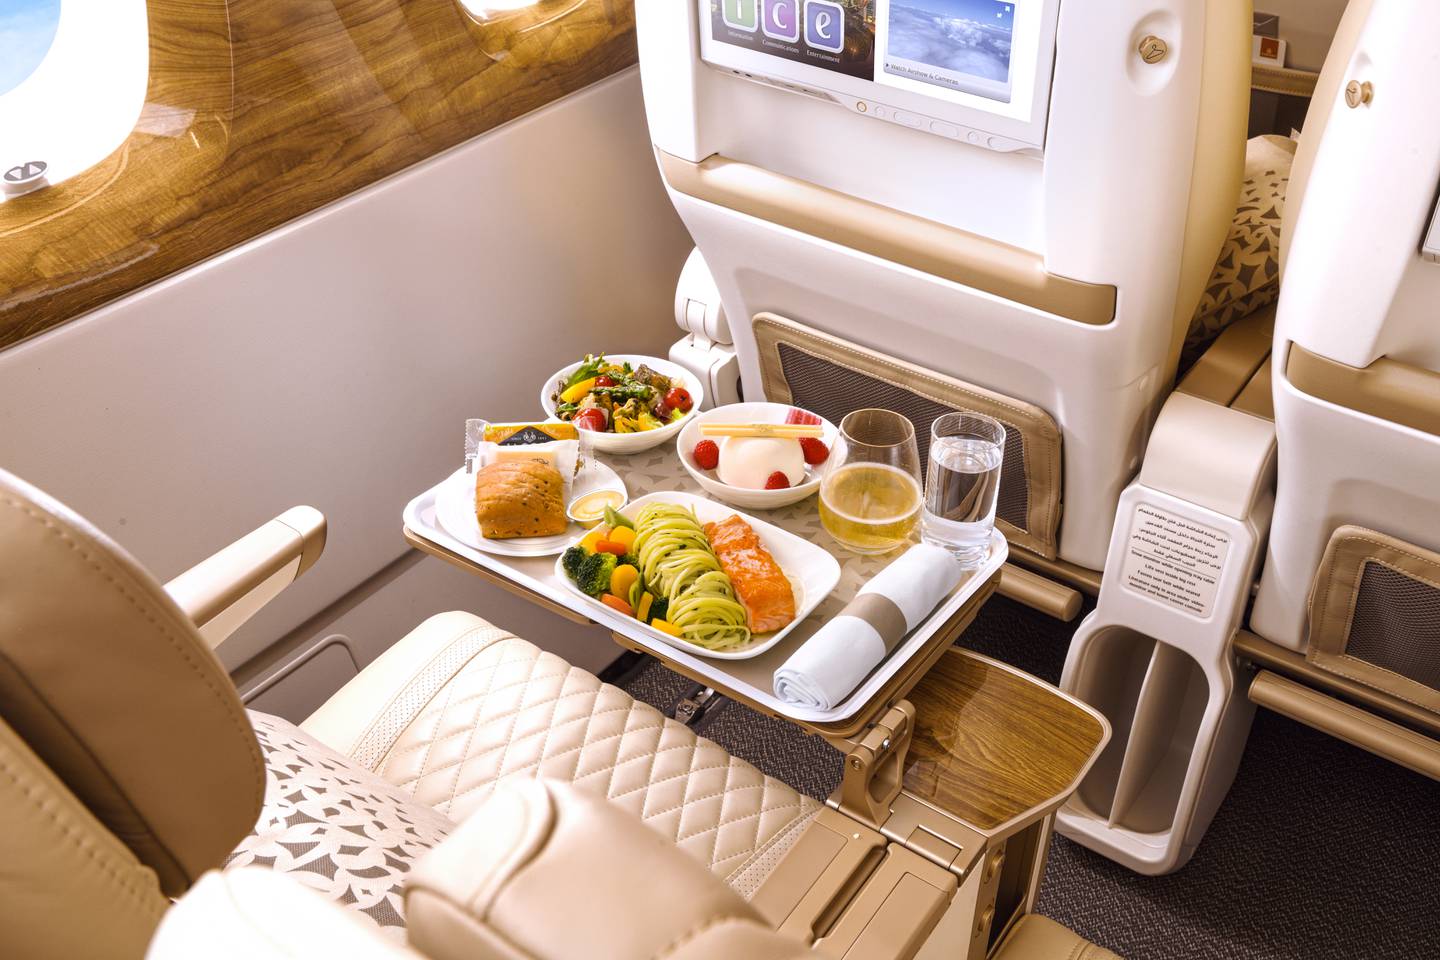 Travellers flying premium economy get a welcome drink on arrival, wider seats with extra legroom and an eight-inch recline. Photo: Emirates